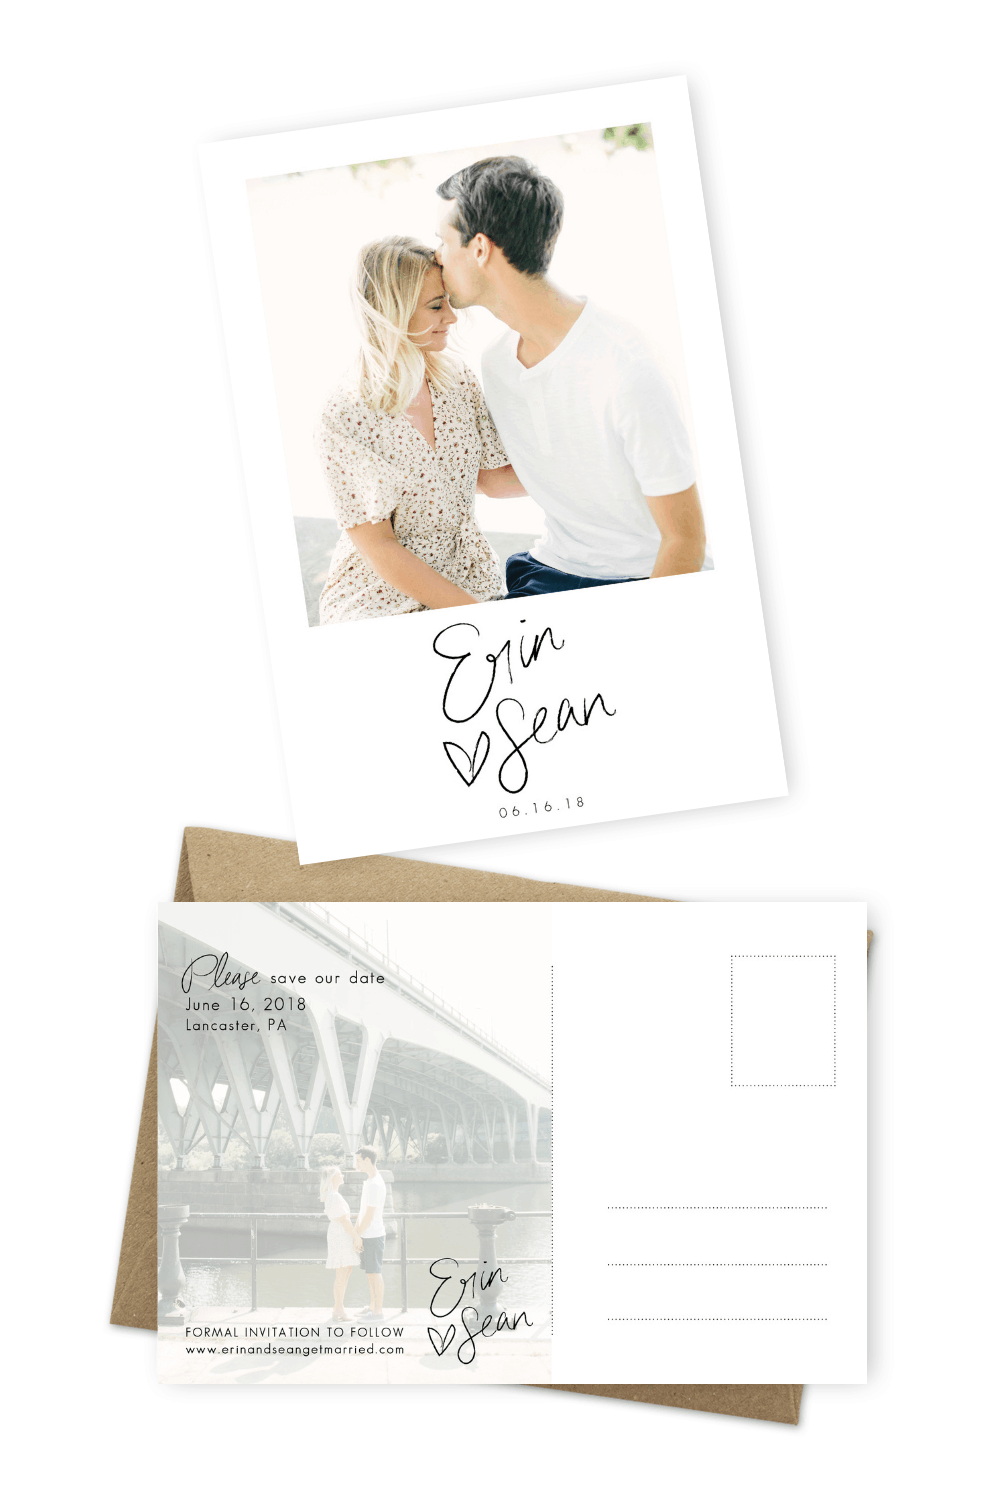 Photo Save the Date Postcards Sydney Australia For the Love of Stationery Maria Mack Photography 2